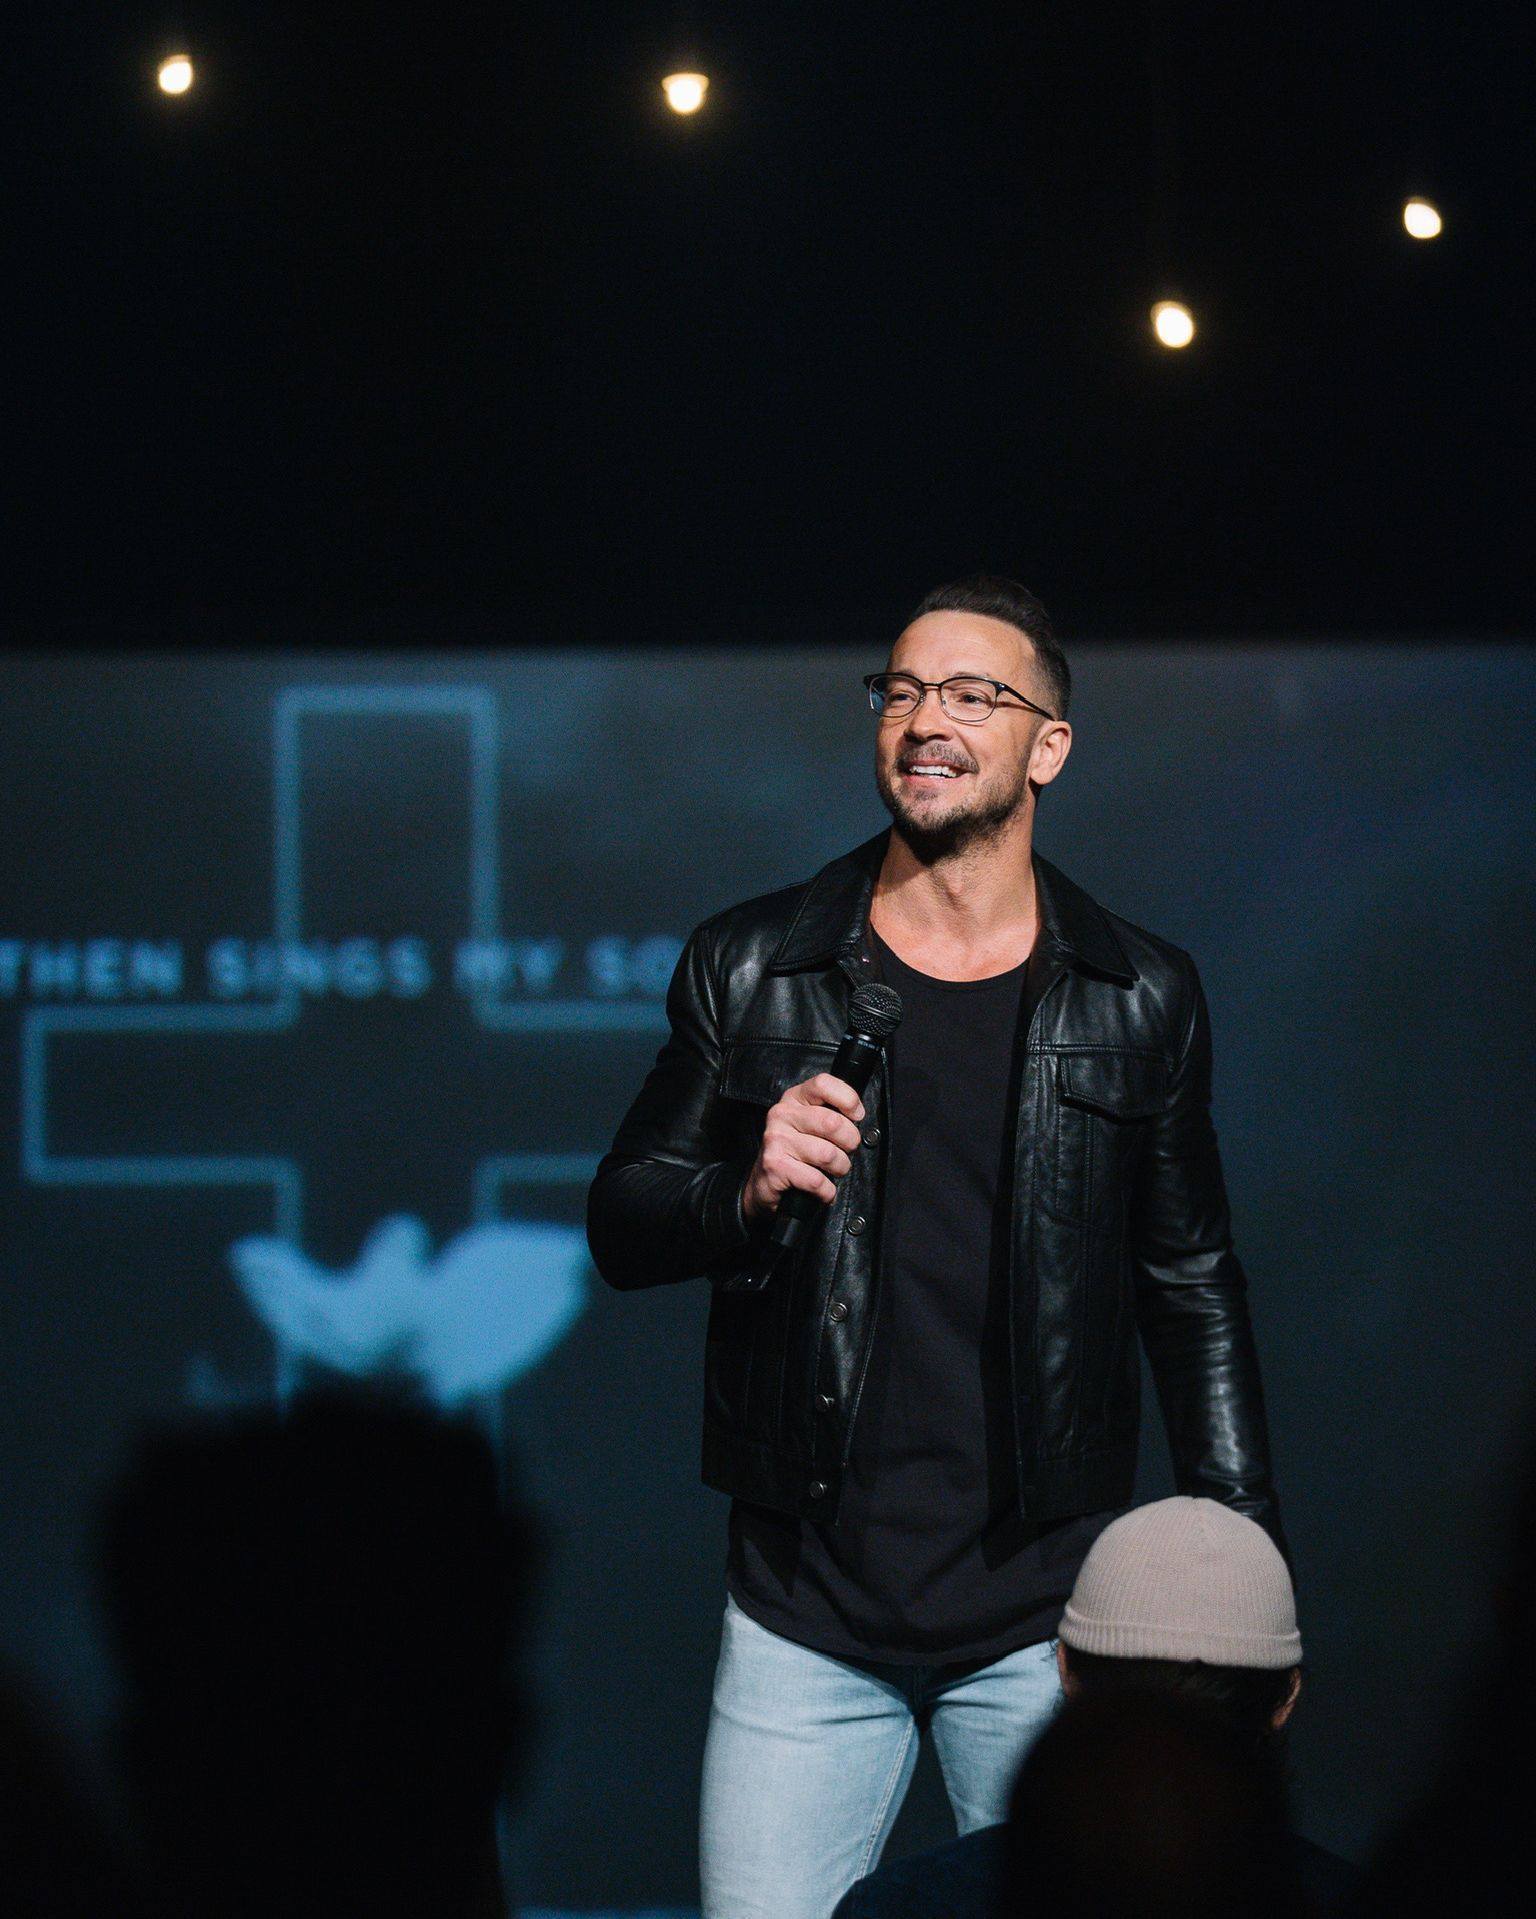 Hillsong pastors say they warned Brian Houston about Carl Lentz's immoral behavior, were ignored